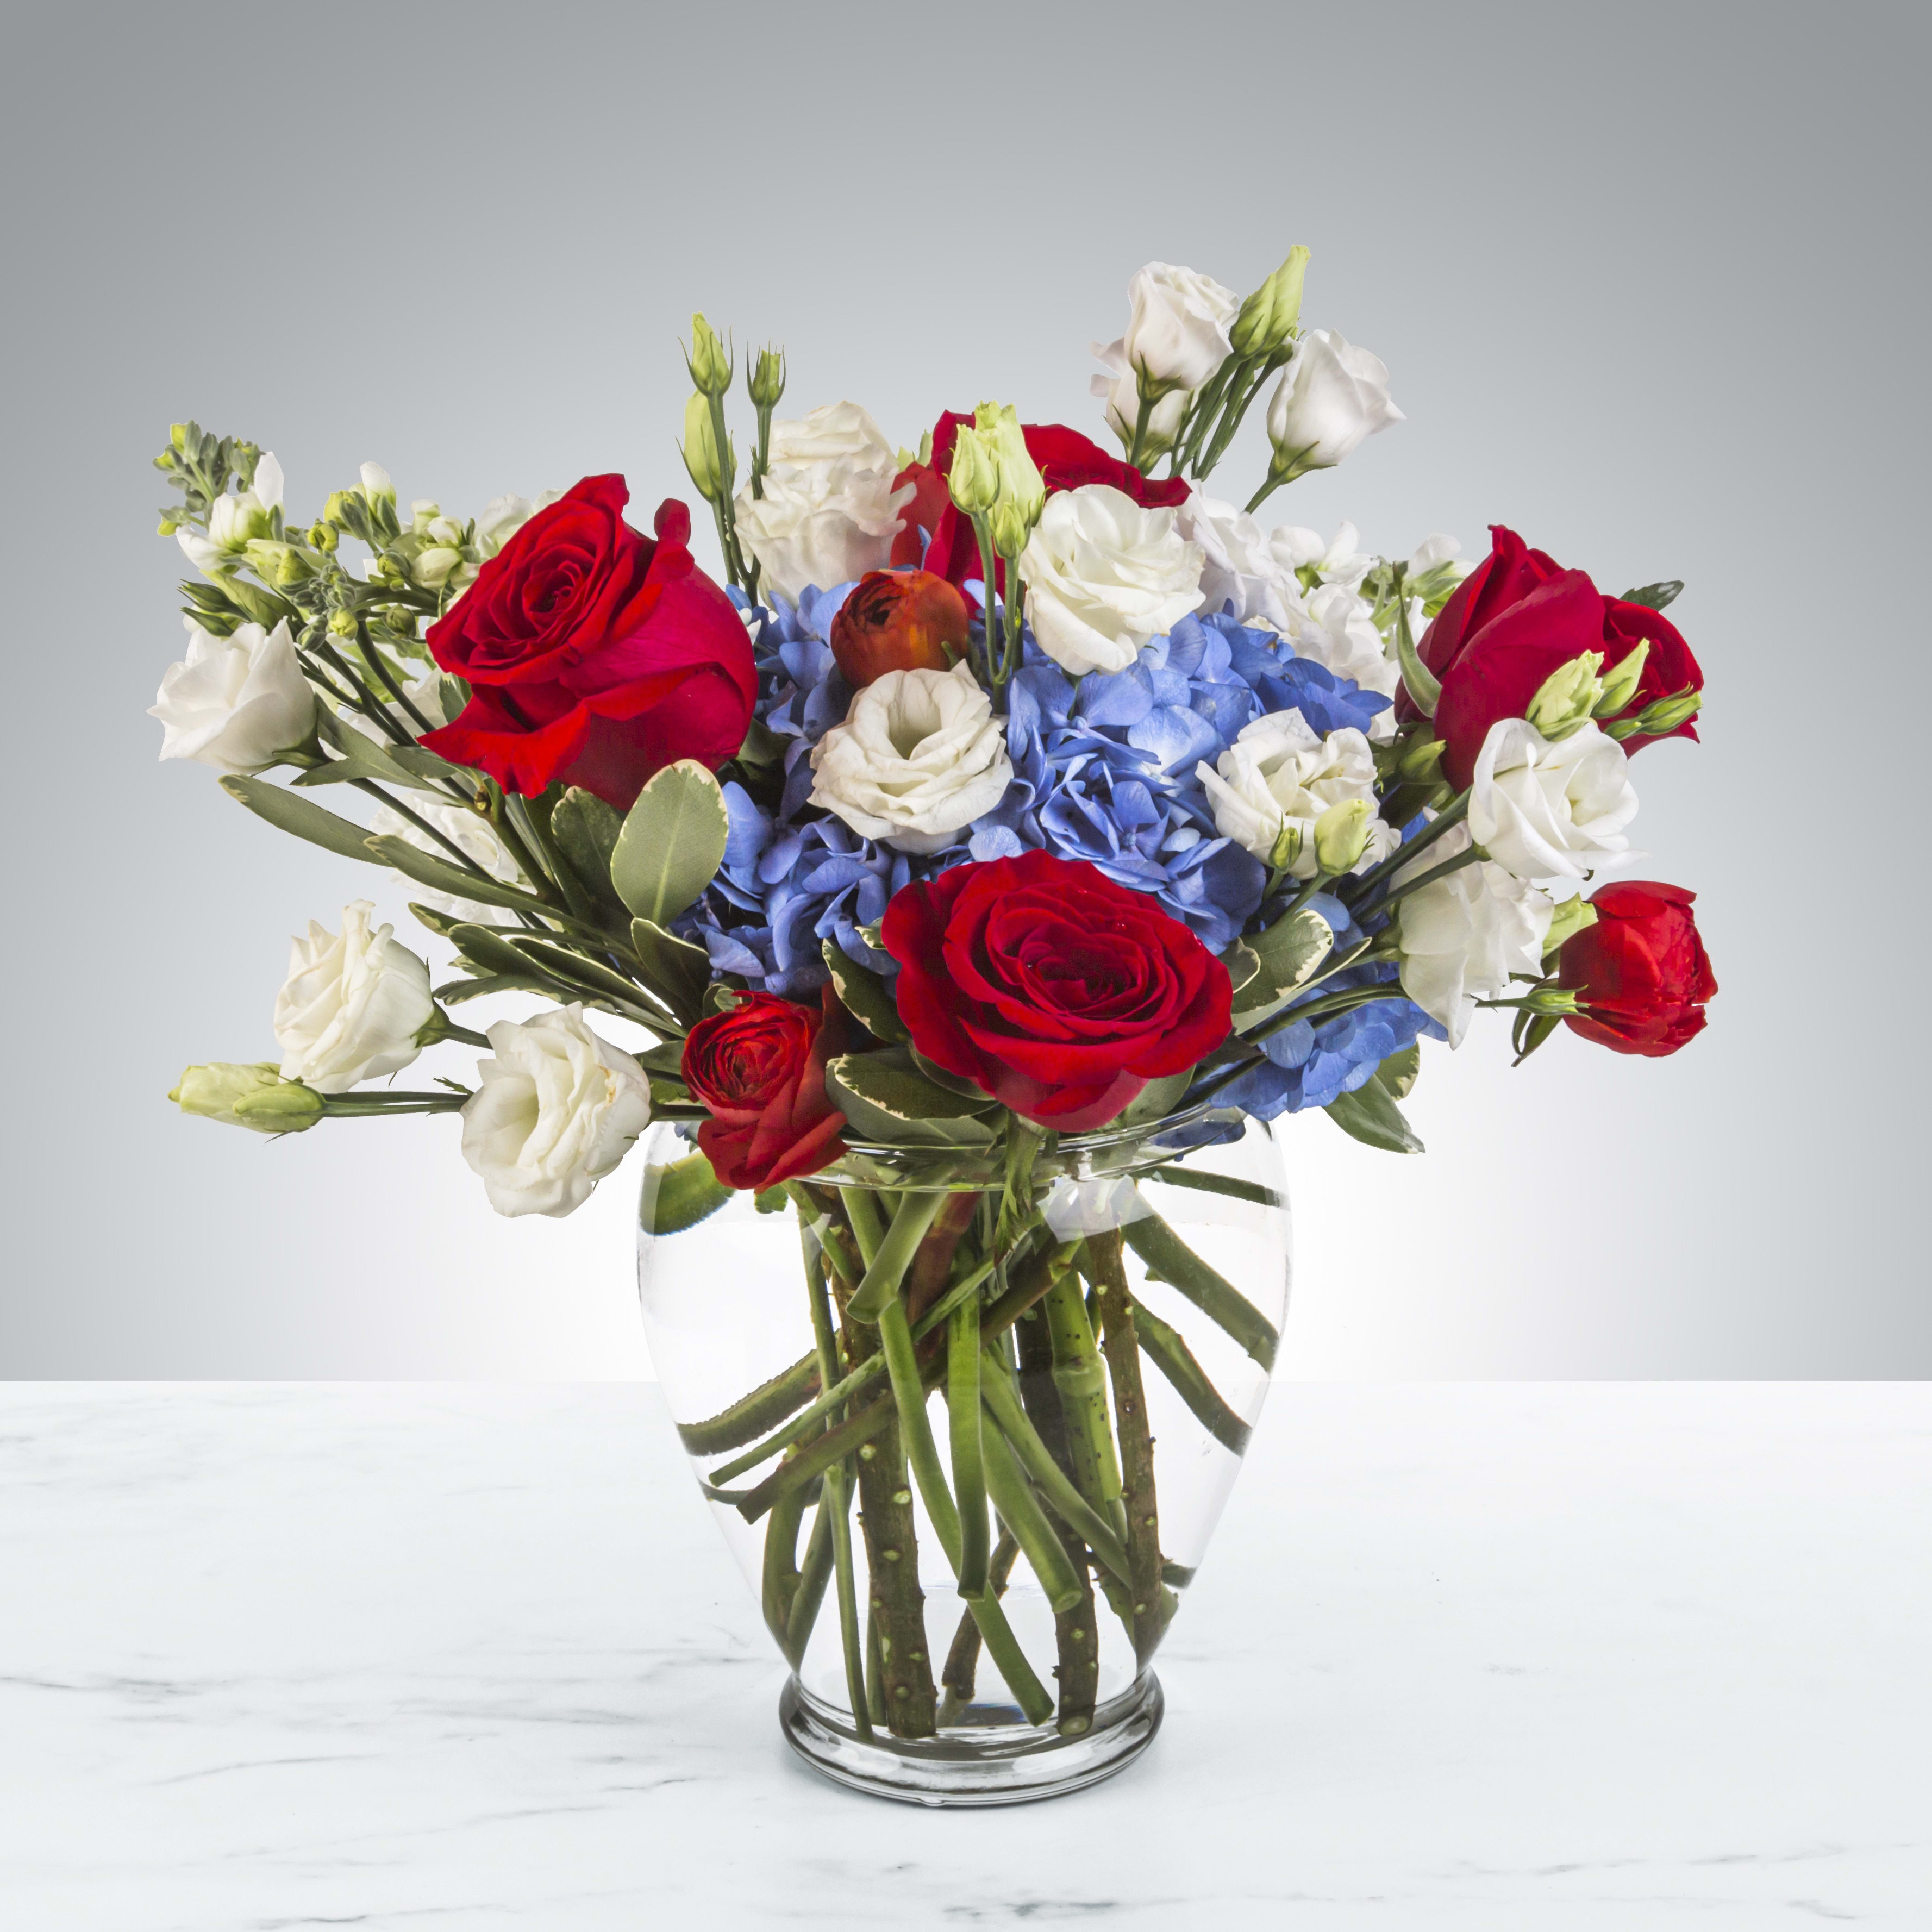 American Girl by BloomNation™ - Red, white and blue is a classic combo. Send a thank you present after being invited to a bbq on Memorial Day weekend, Labor Day, Fourth of July or just send a gift to your patriotic friend. 